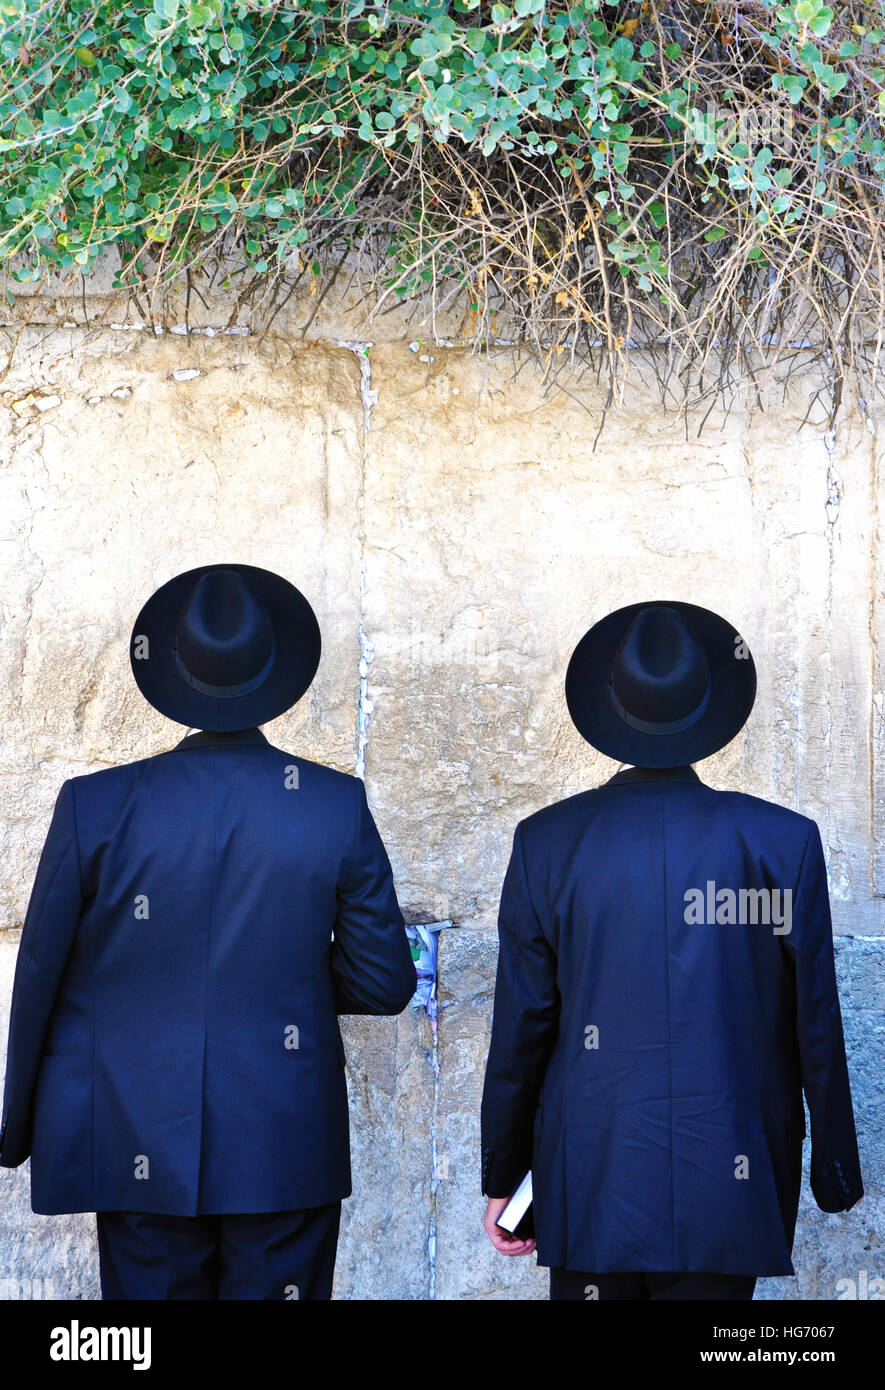 Two Jewish men wearing black suits and hats, praying at the western wall in Jerusalem Stock Photo